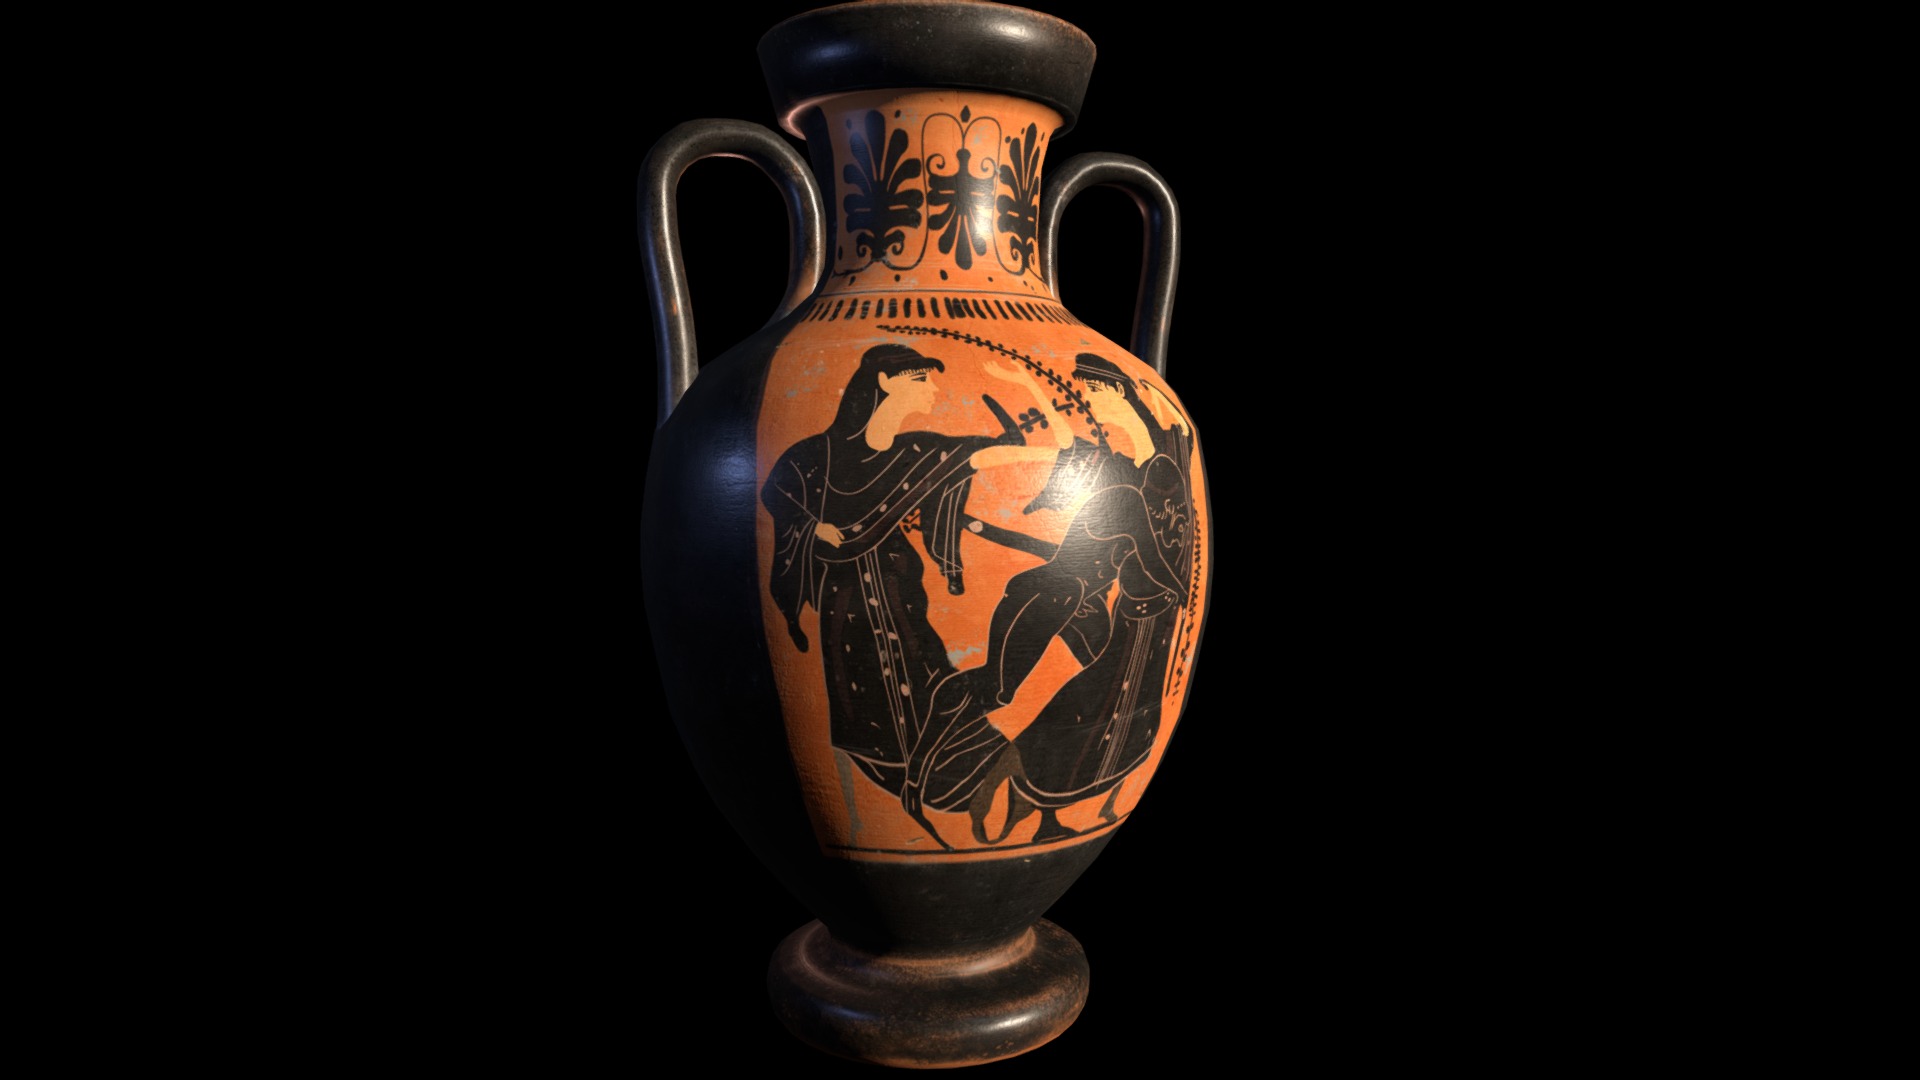 3D model Black-figure pottery #1 - This is a 3D model of the Black-figure pottery #1. The 3D model is about a black vase with a painting on it.